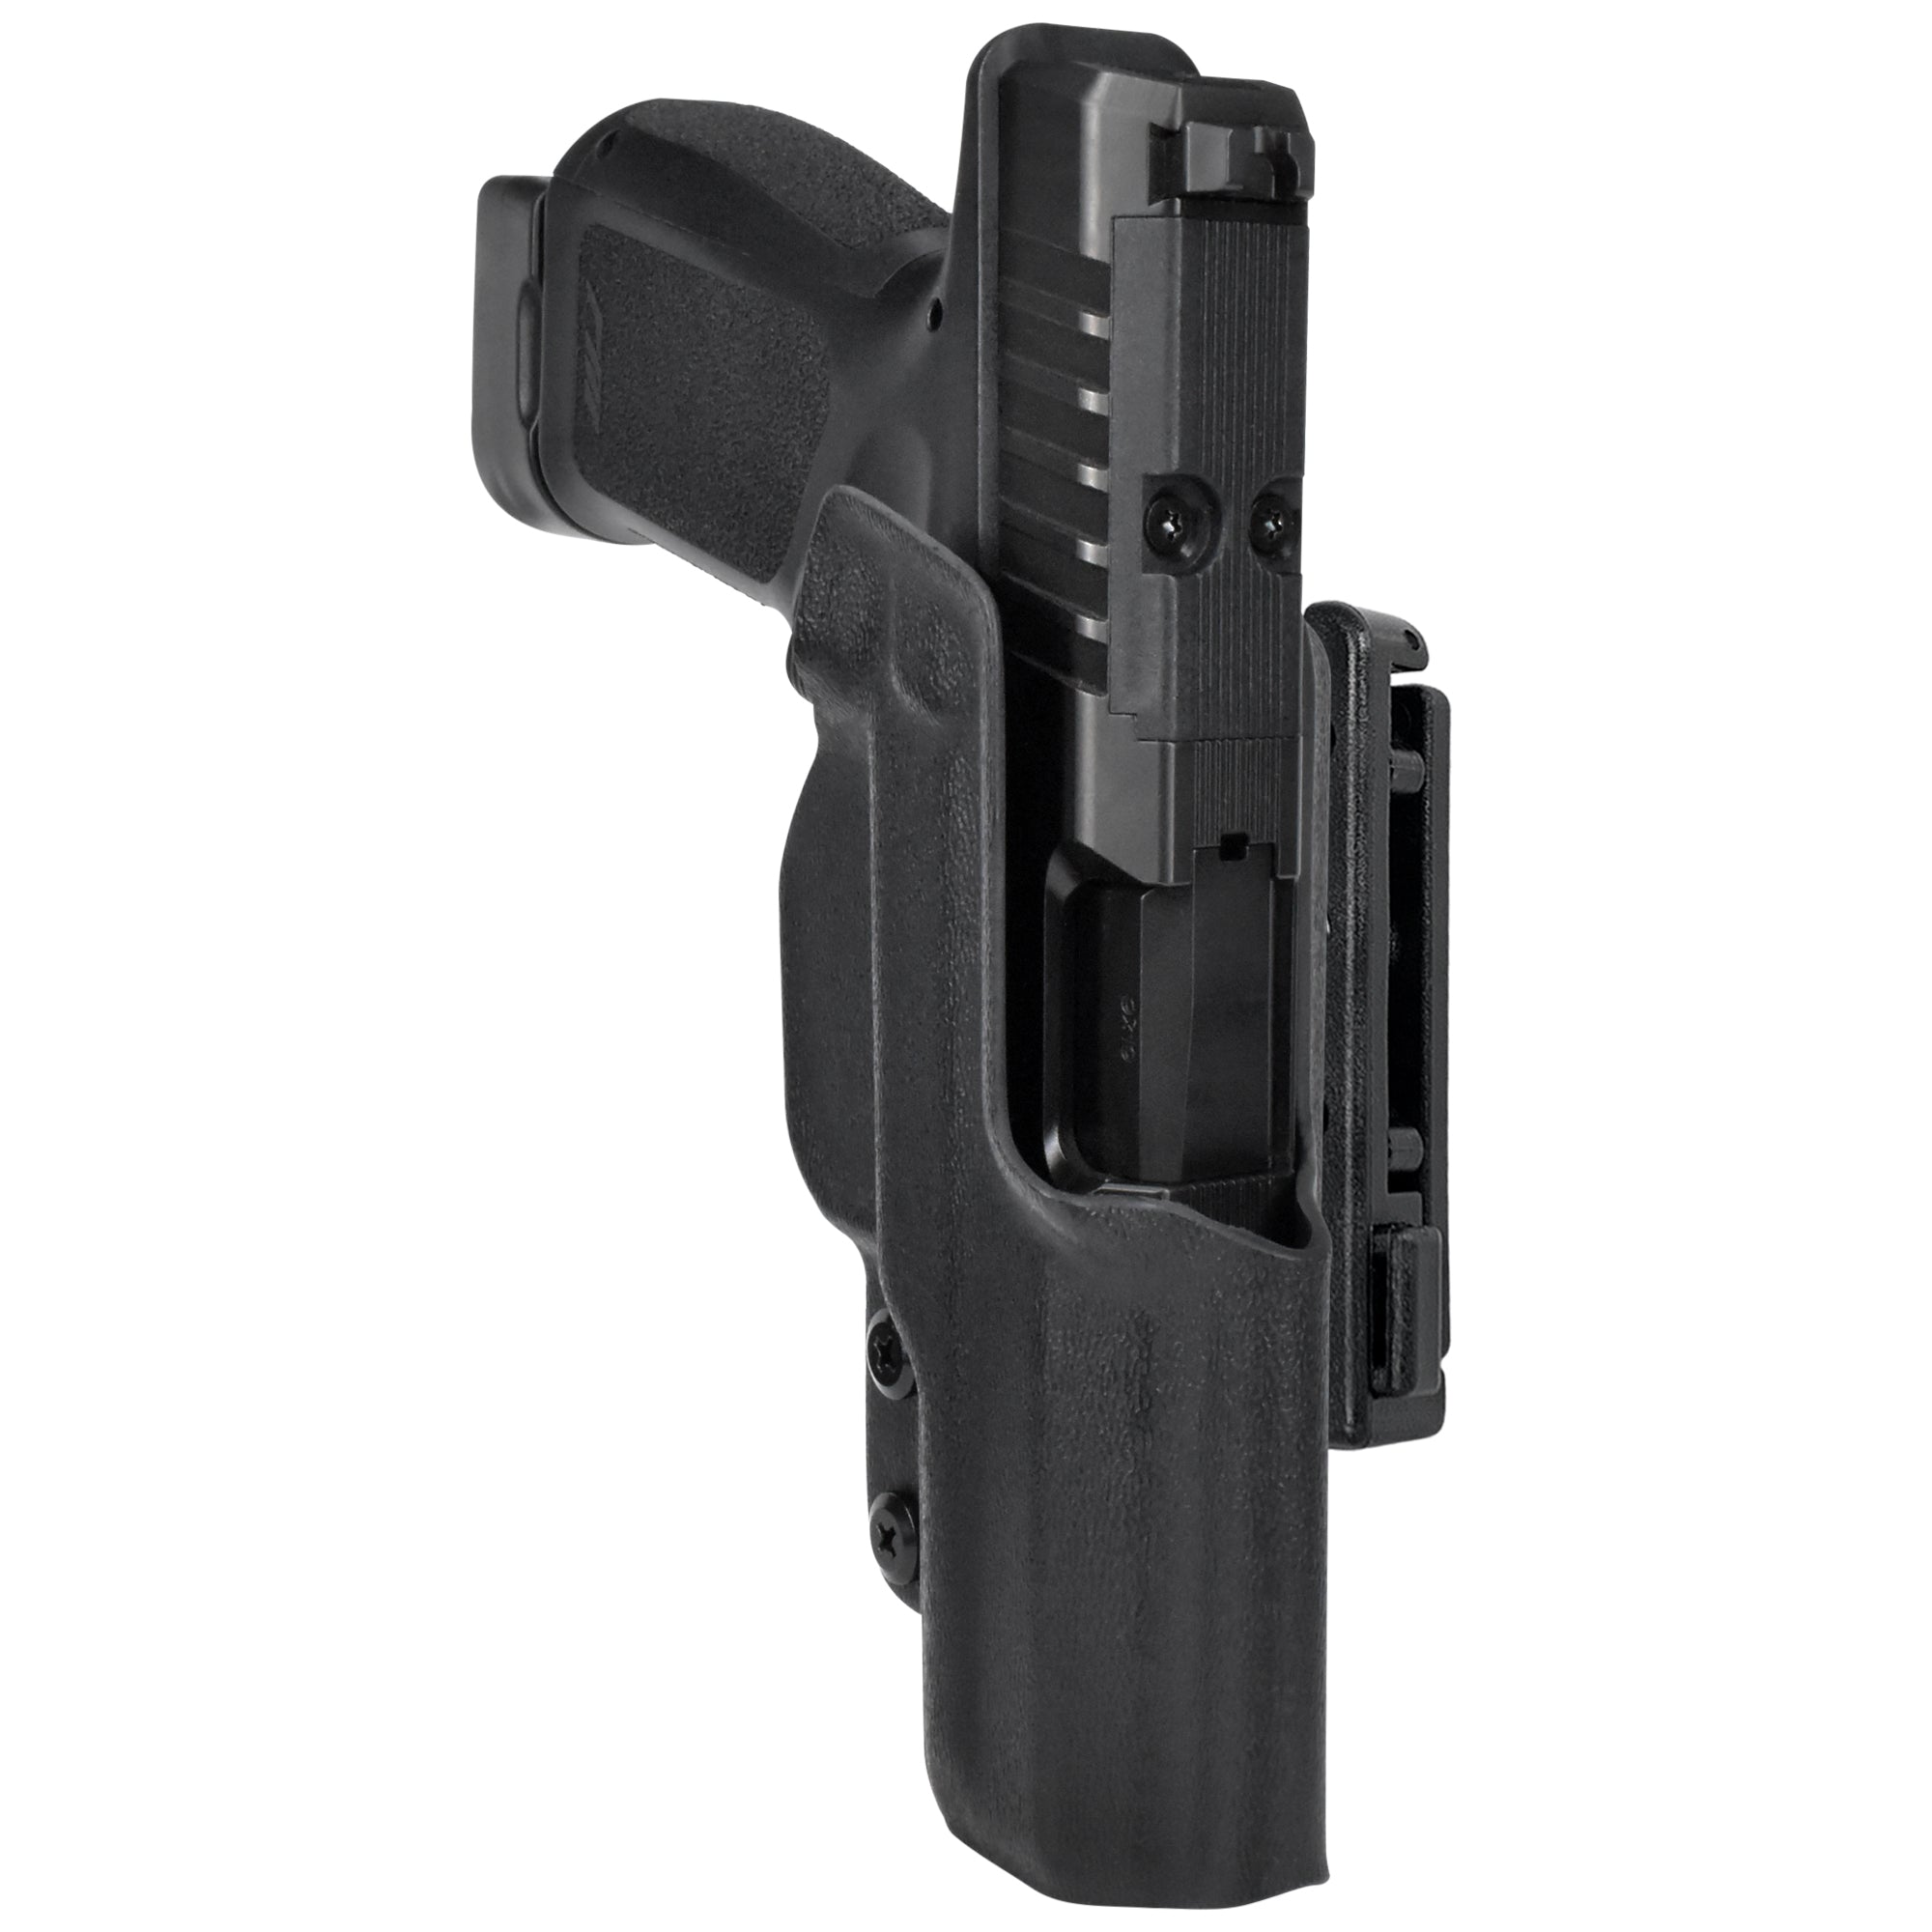 Rost Martin RM1C Pro IDPA Competition Holster in Black